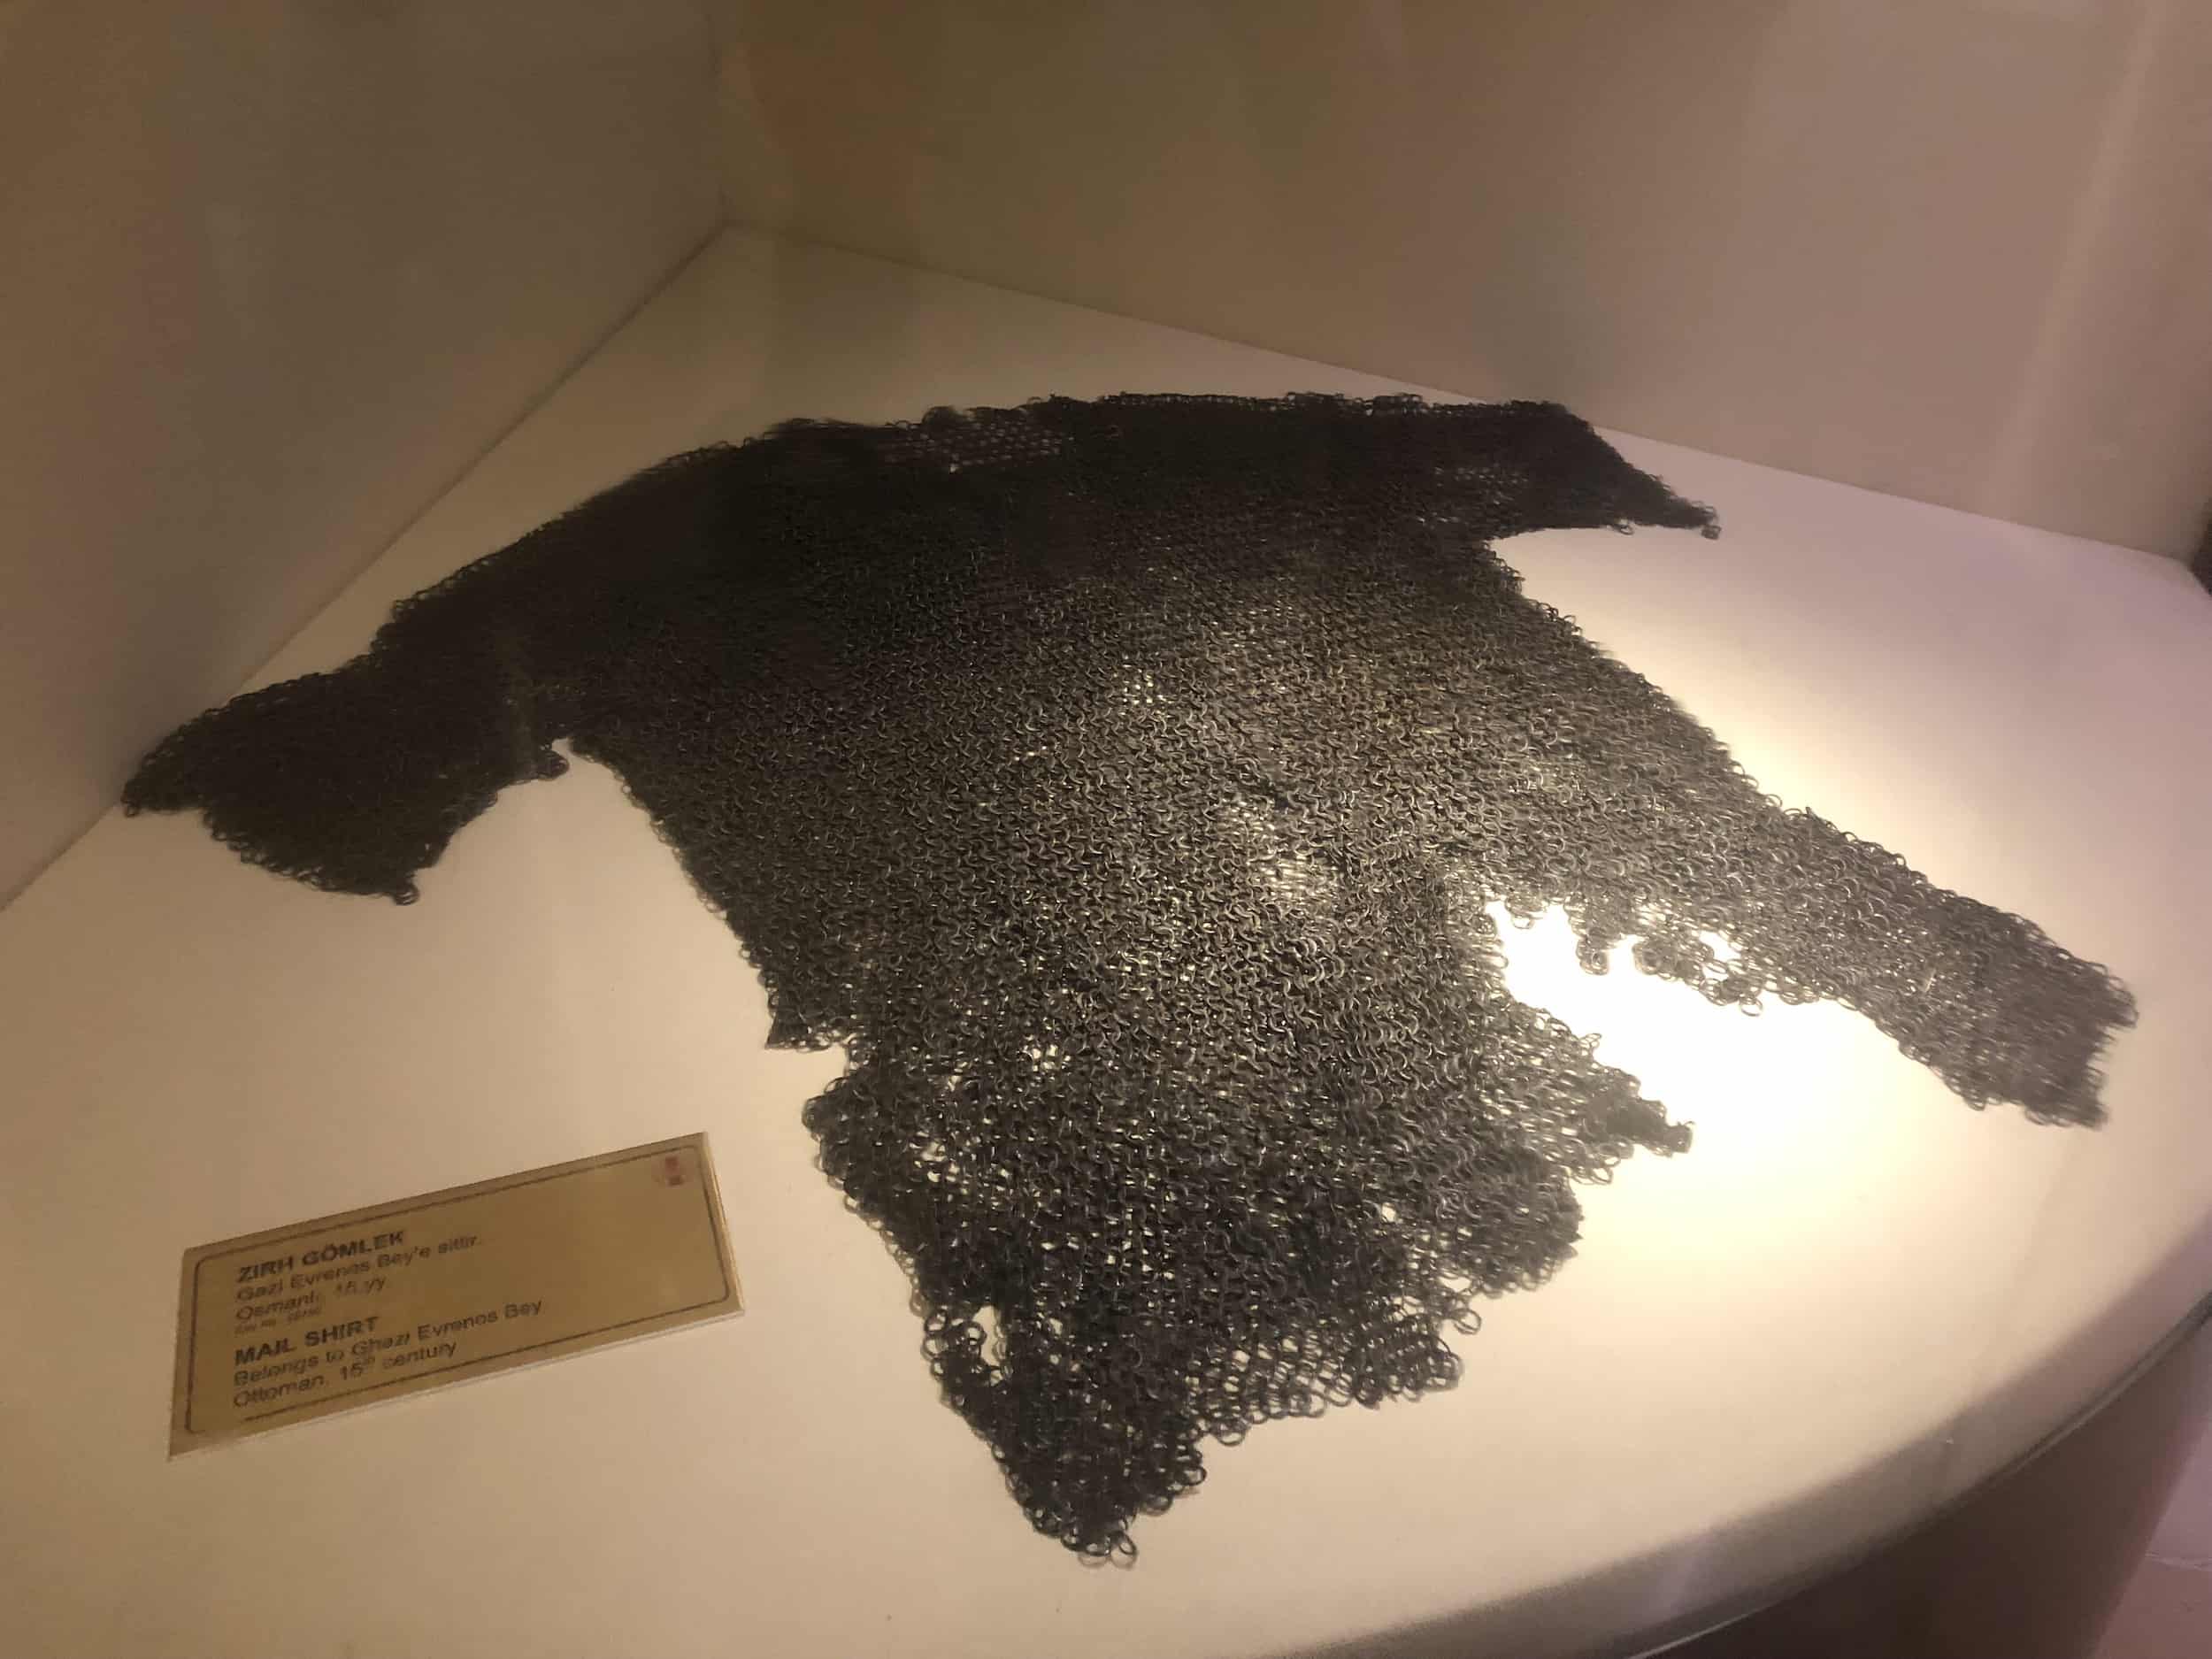 14th century chain mail shirt in the Ottoman State Establishment Hall at the Harbiye Military Museum in Istanbul, Turkey